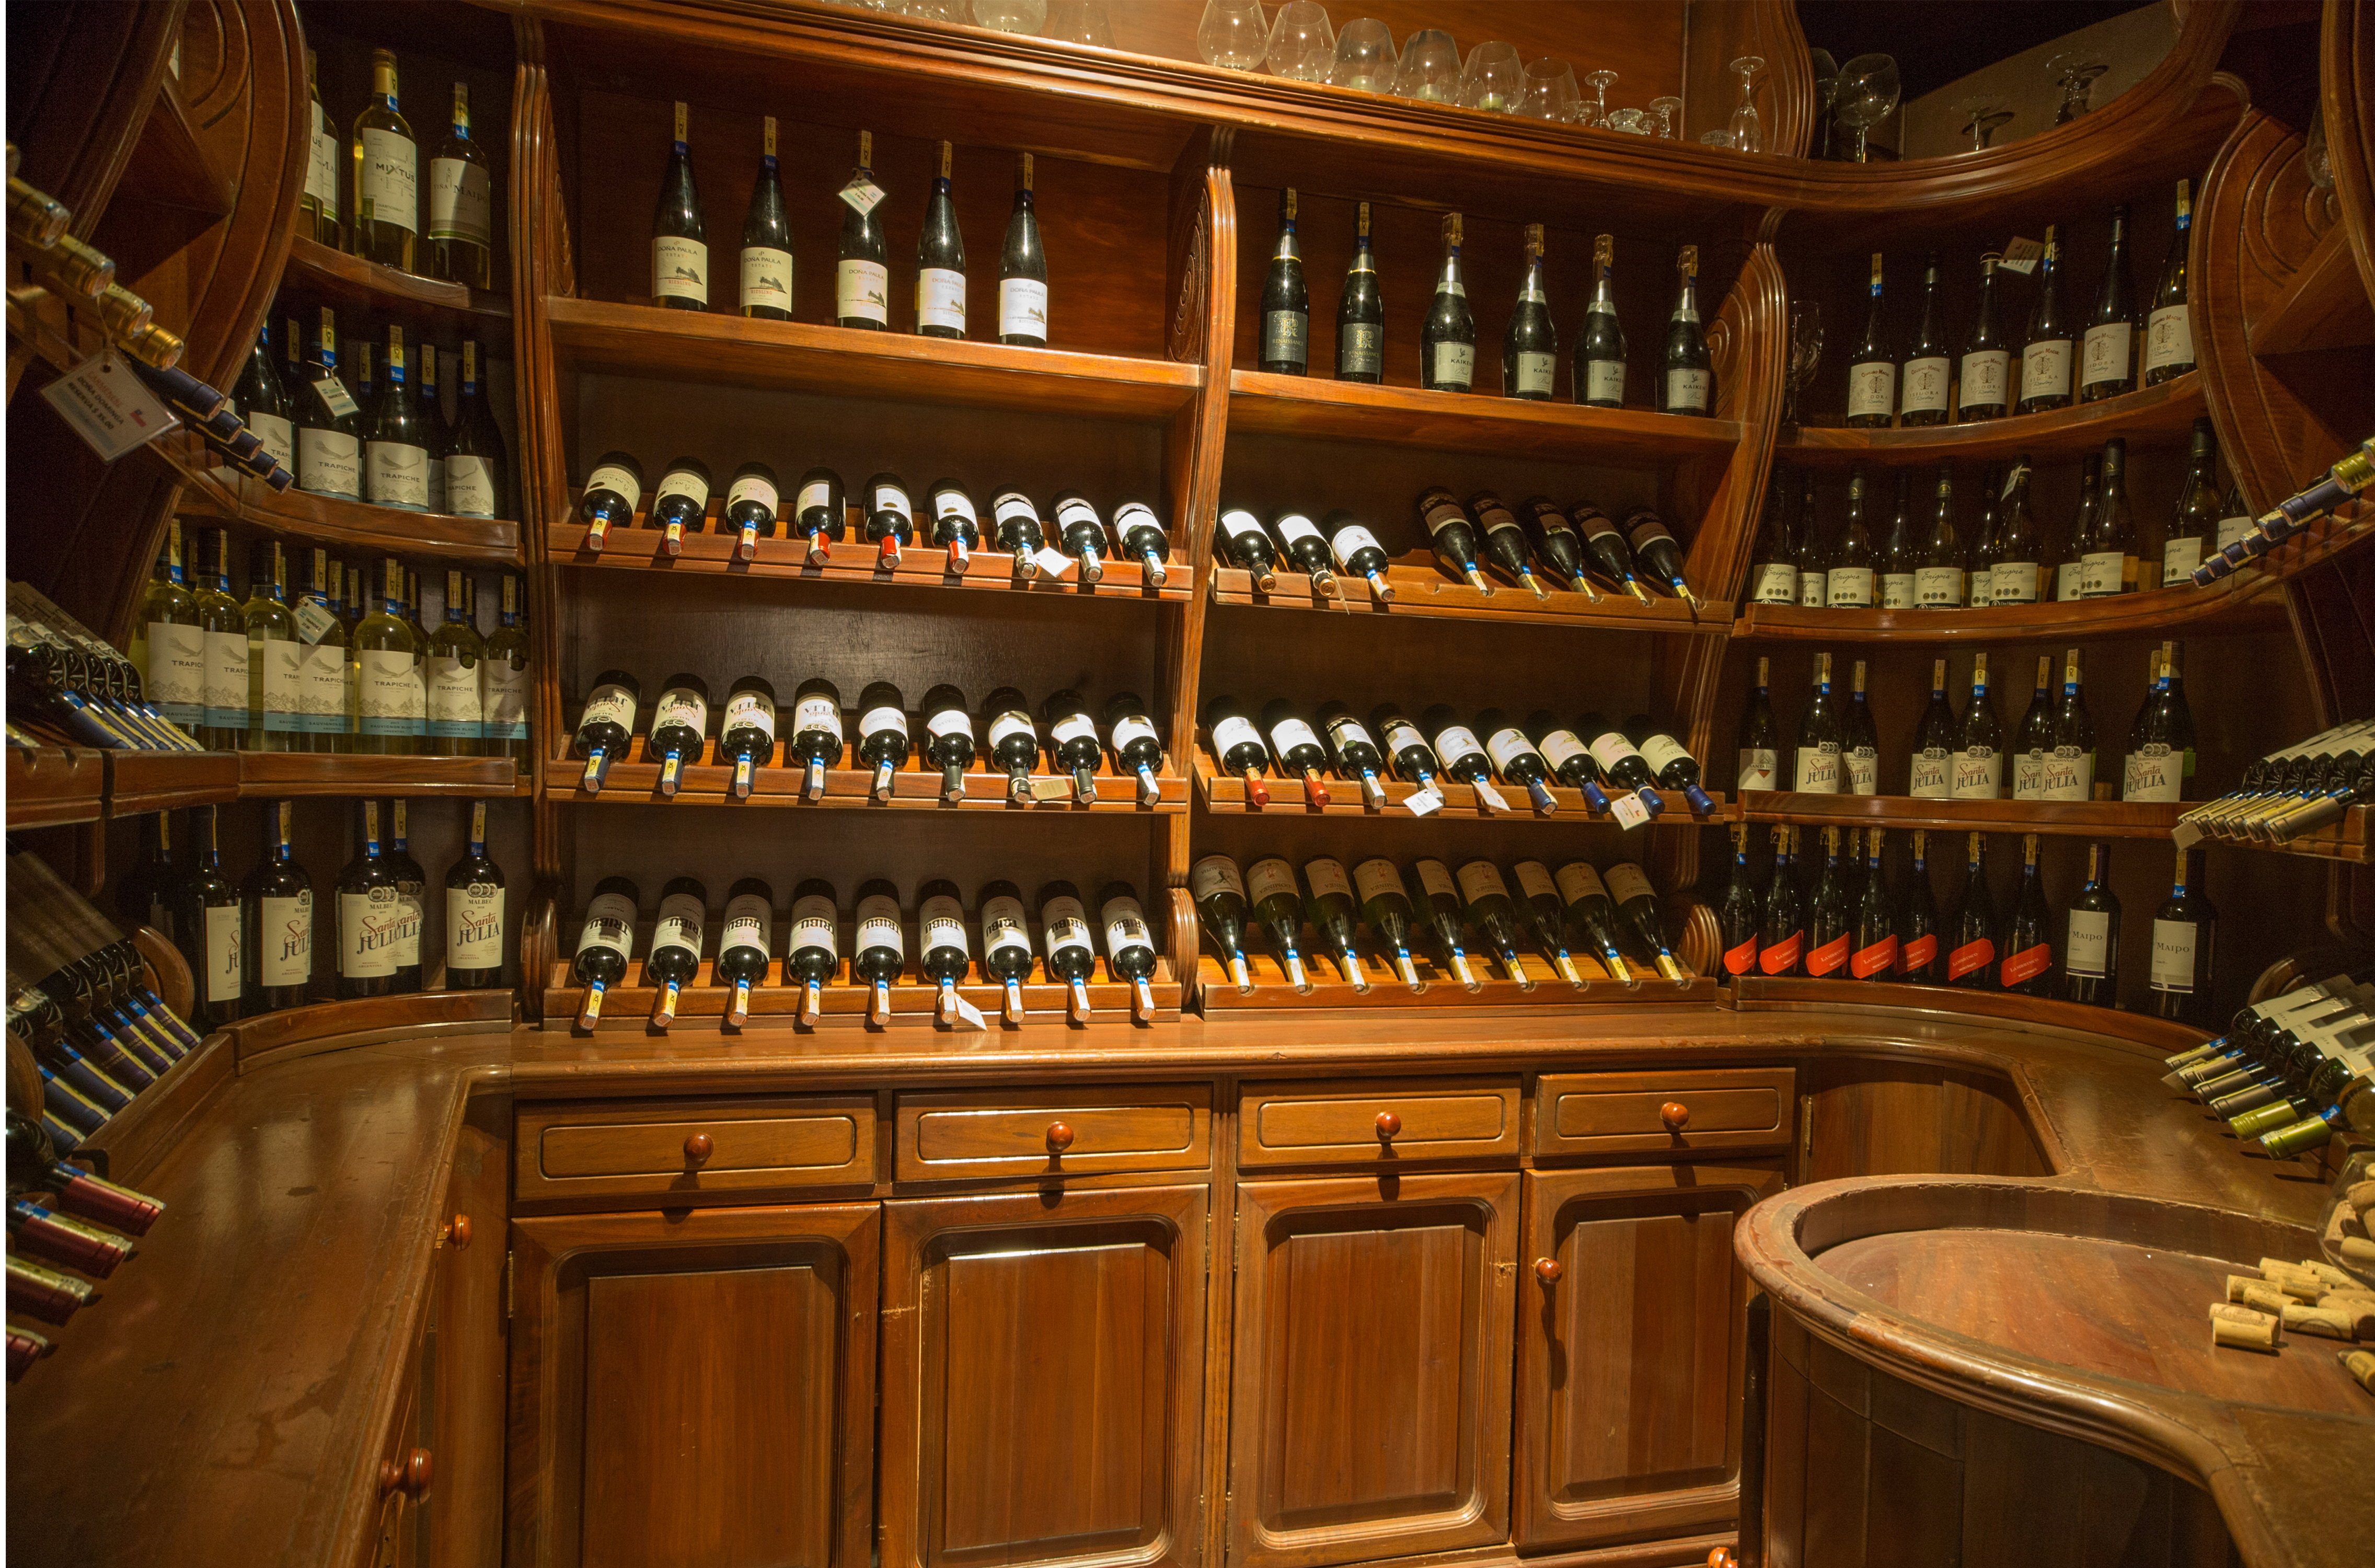 Wine roomwith selection of wine bottles